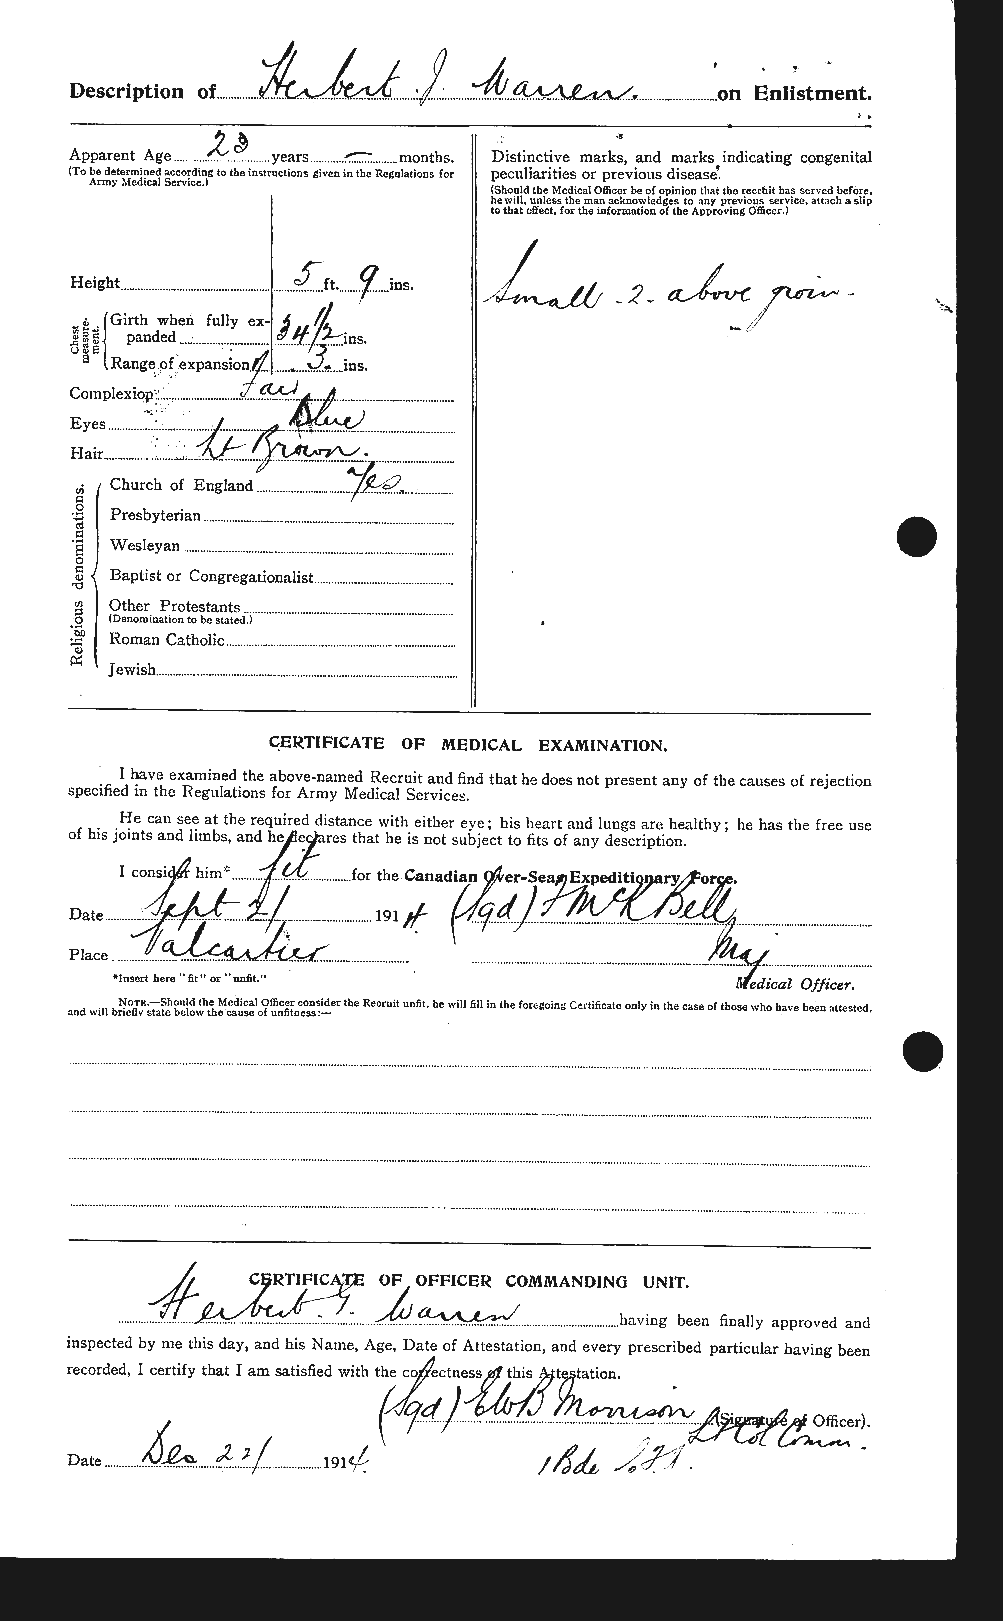 Personnel Records of the First World War - CEF 658501b